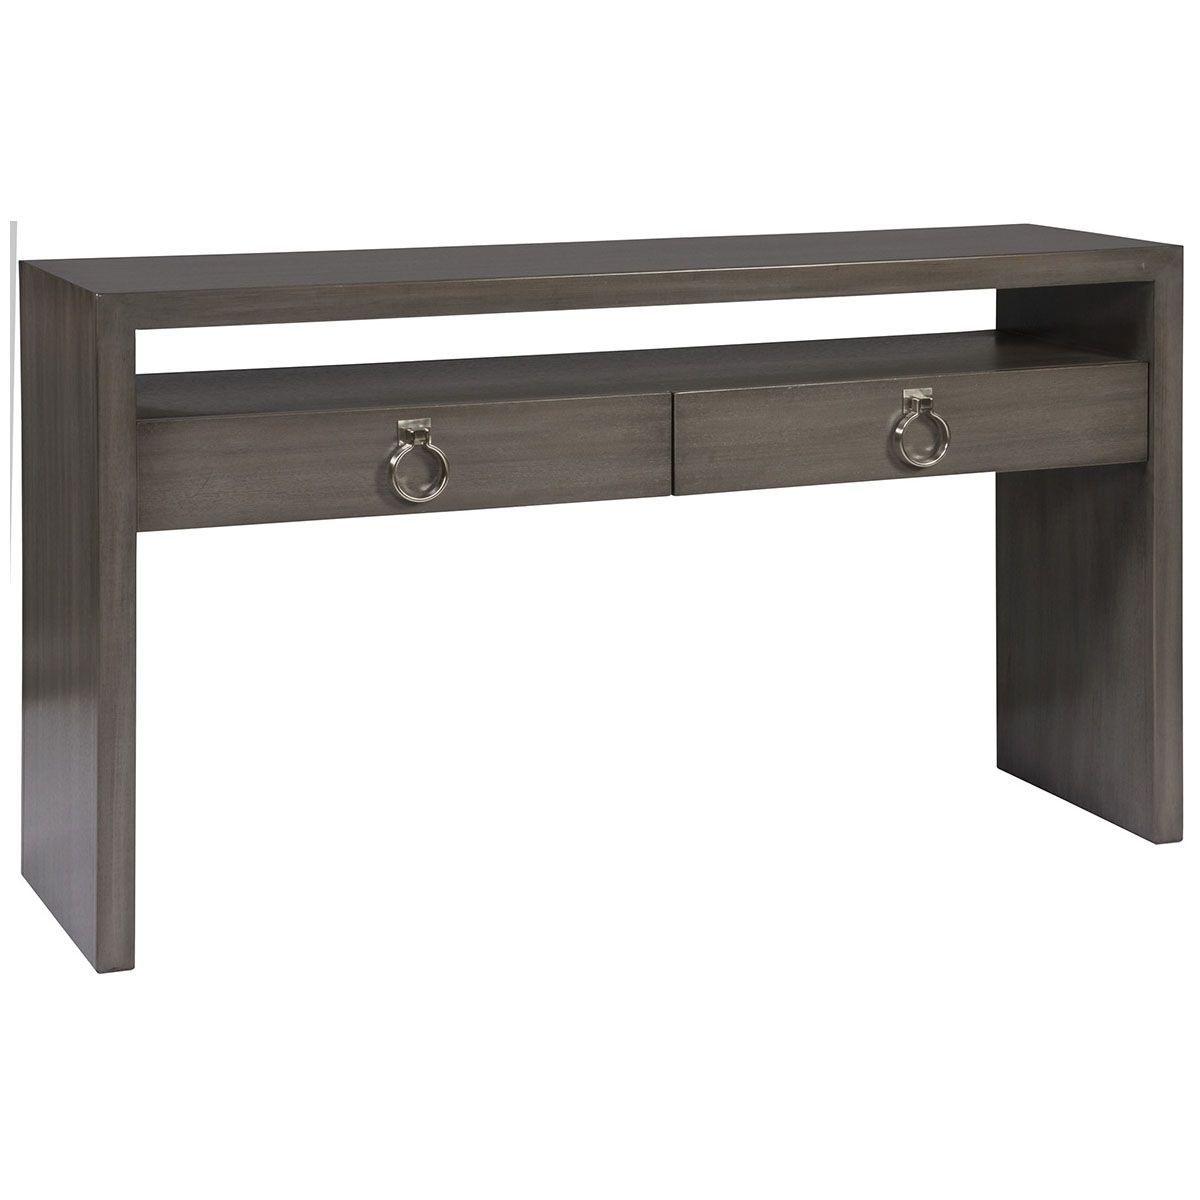 Vanguard Furniture Margo Console W349s Lg | Vanguad Furniture Intended For Parsons Black Marble Top &amp; Dark Steel Base 48x16 Console Tables (Photo 8 of 30)